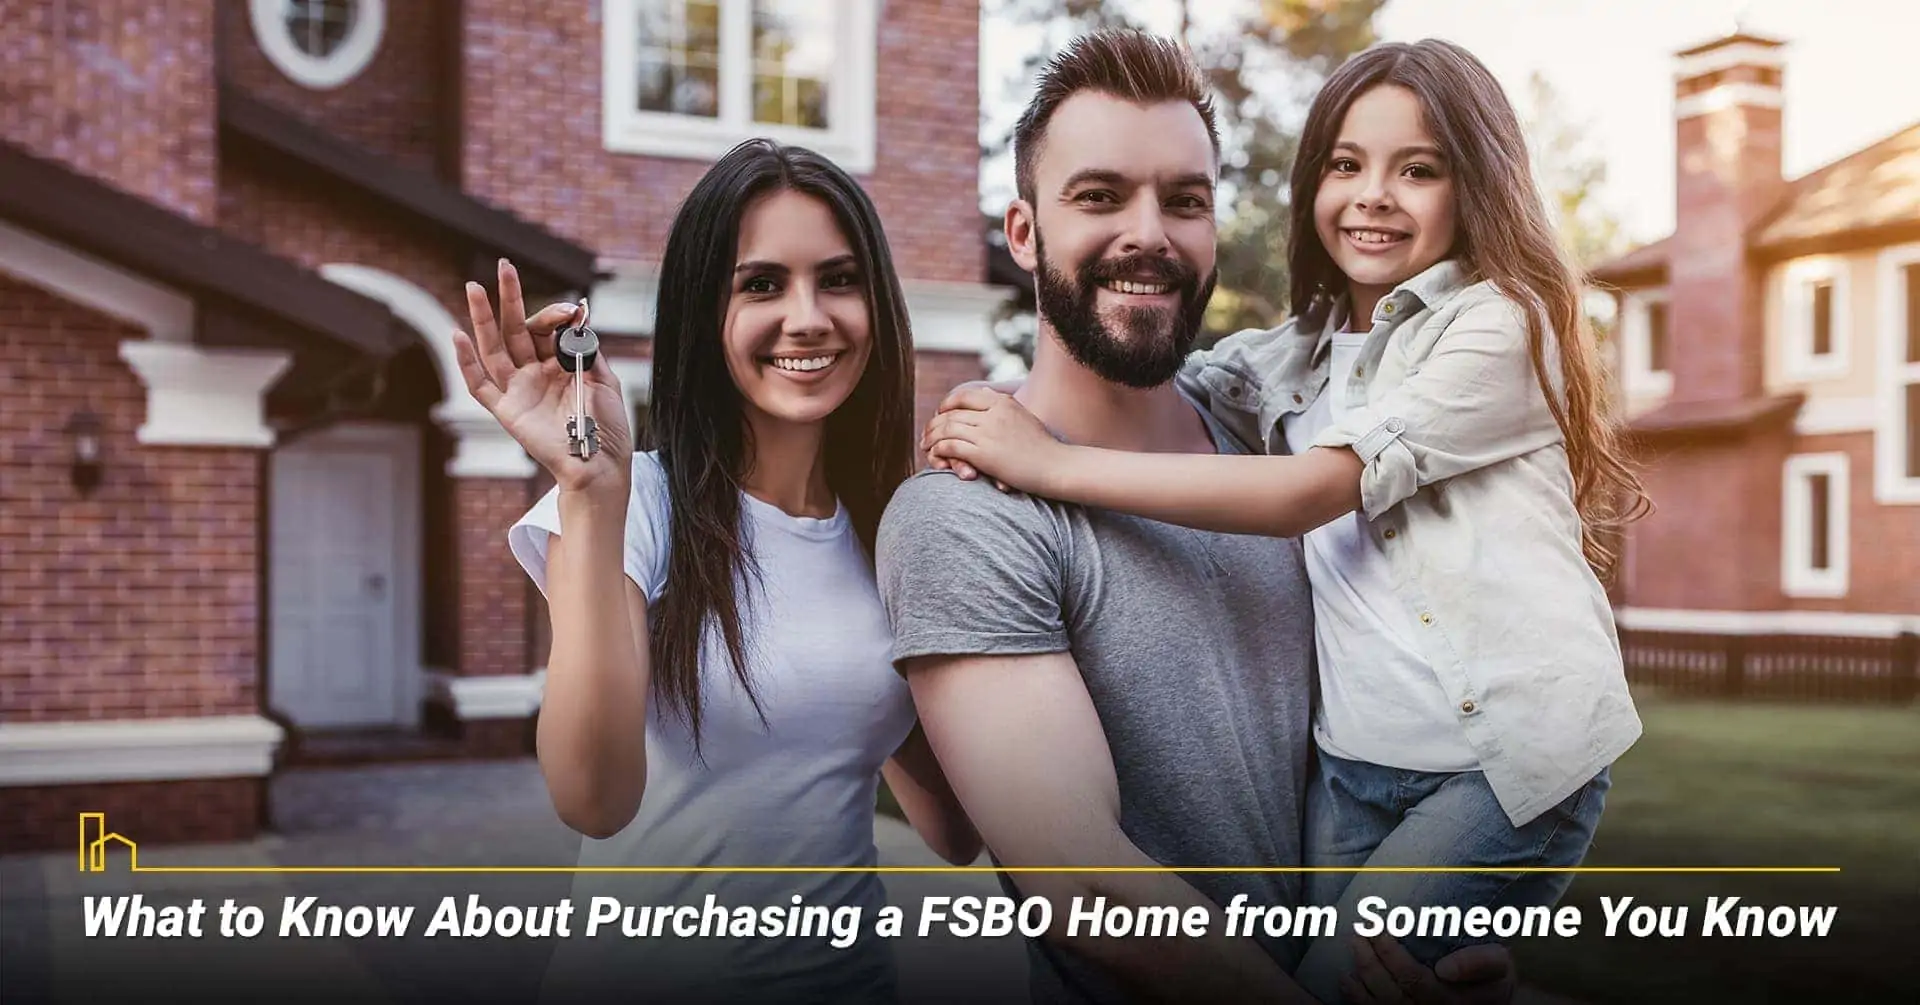 What to Know About Purchasing a FSBO Home from Someone You Know, things to consider when buying a FSBO home from an acquaint